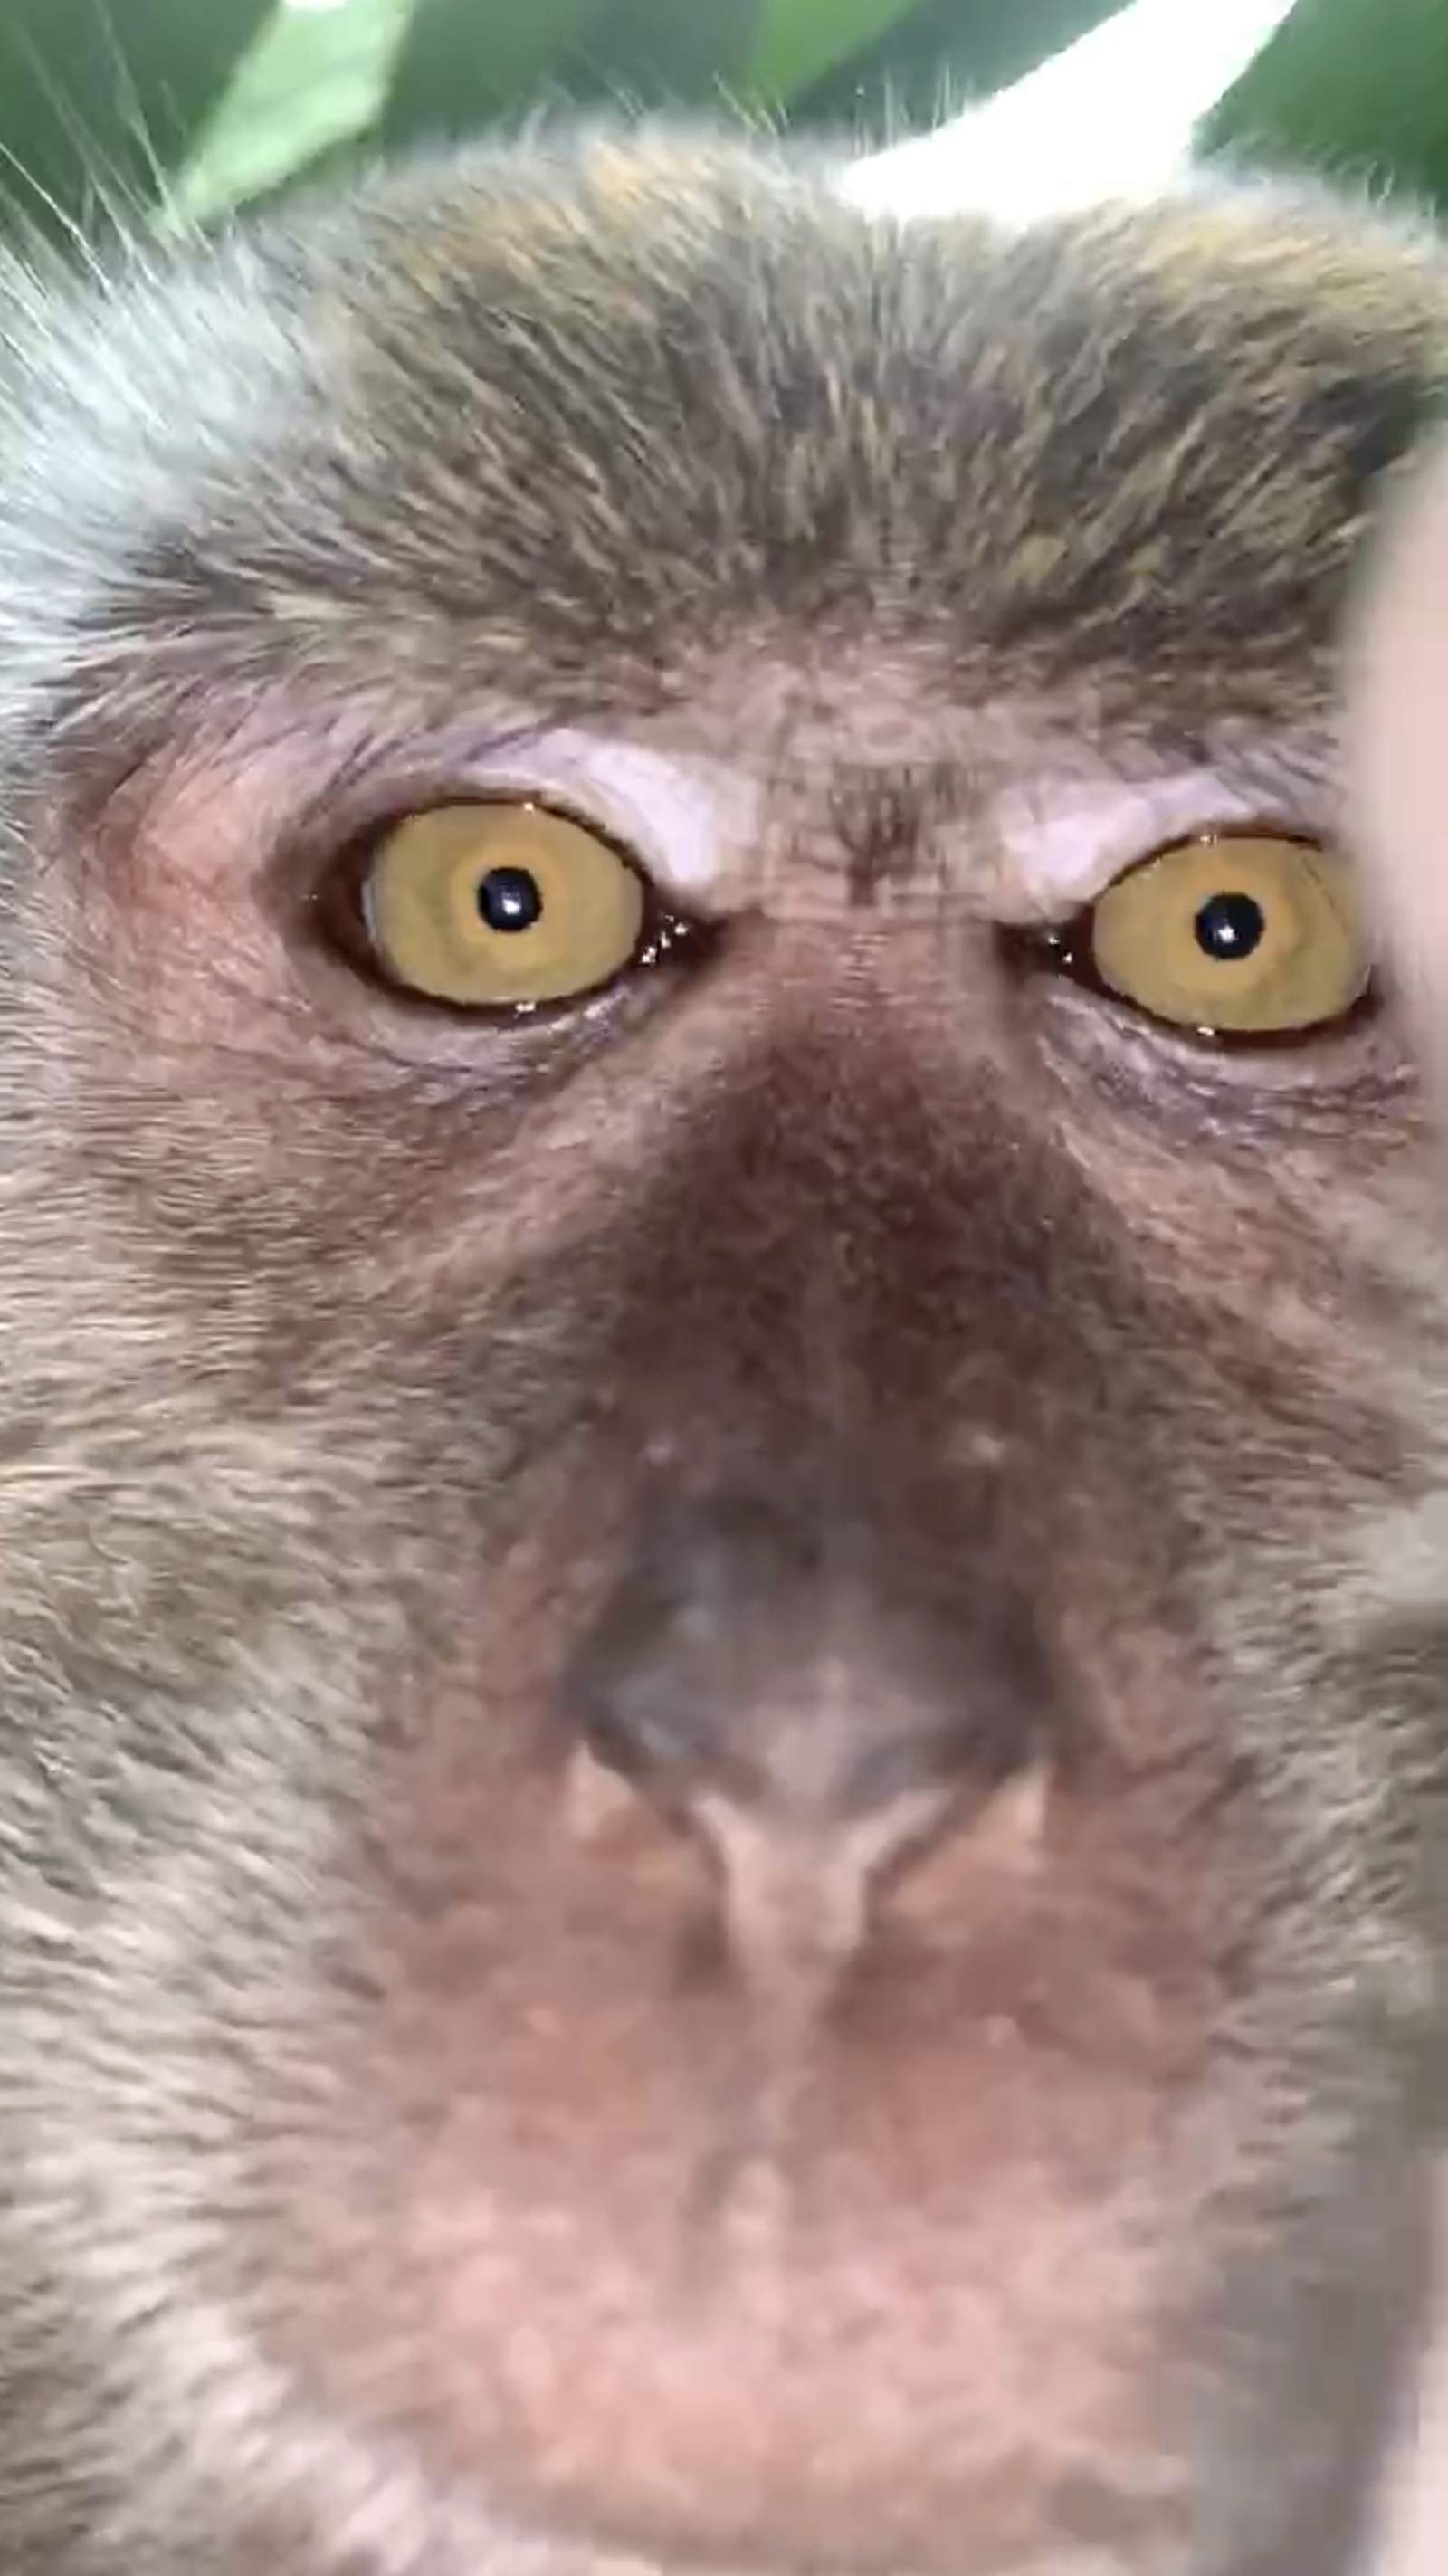 Primate monkeys around with student's phone, takes selfies